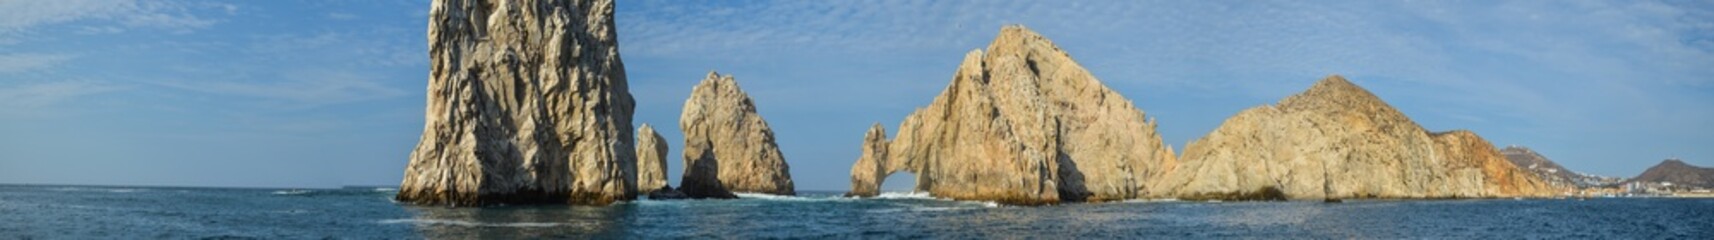 Cabo Mexico Arch Stone Structure in Ocean Panorama